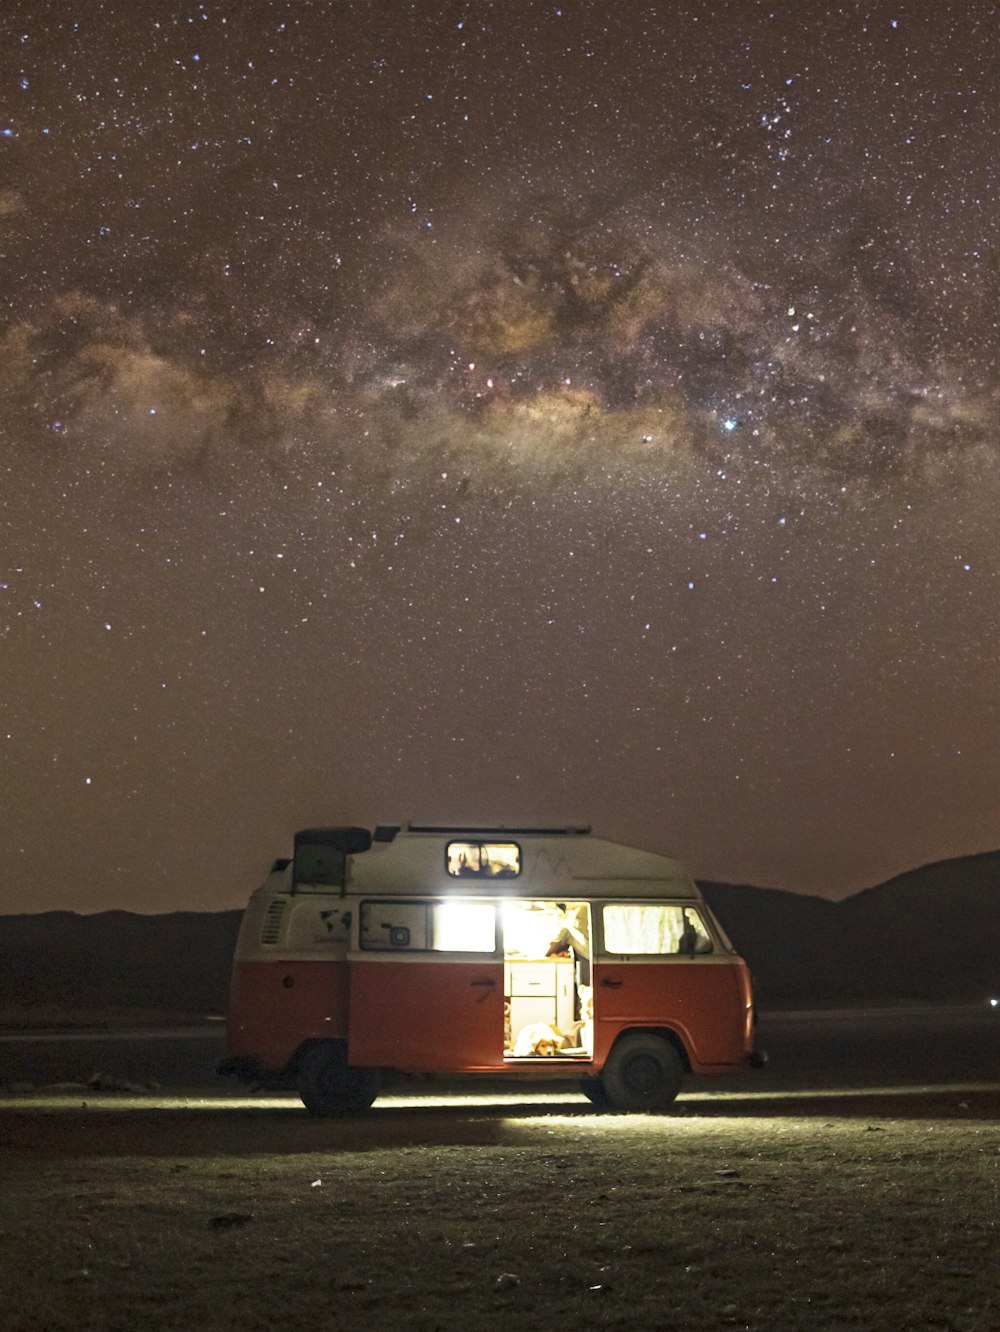 a van is parked under the stars in the sky